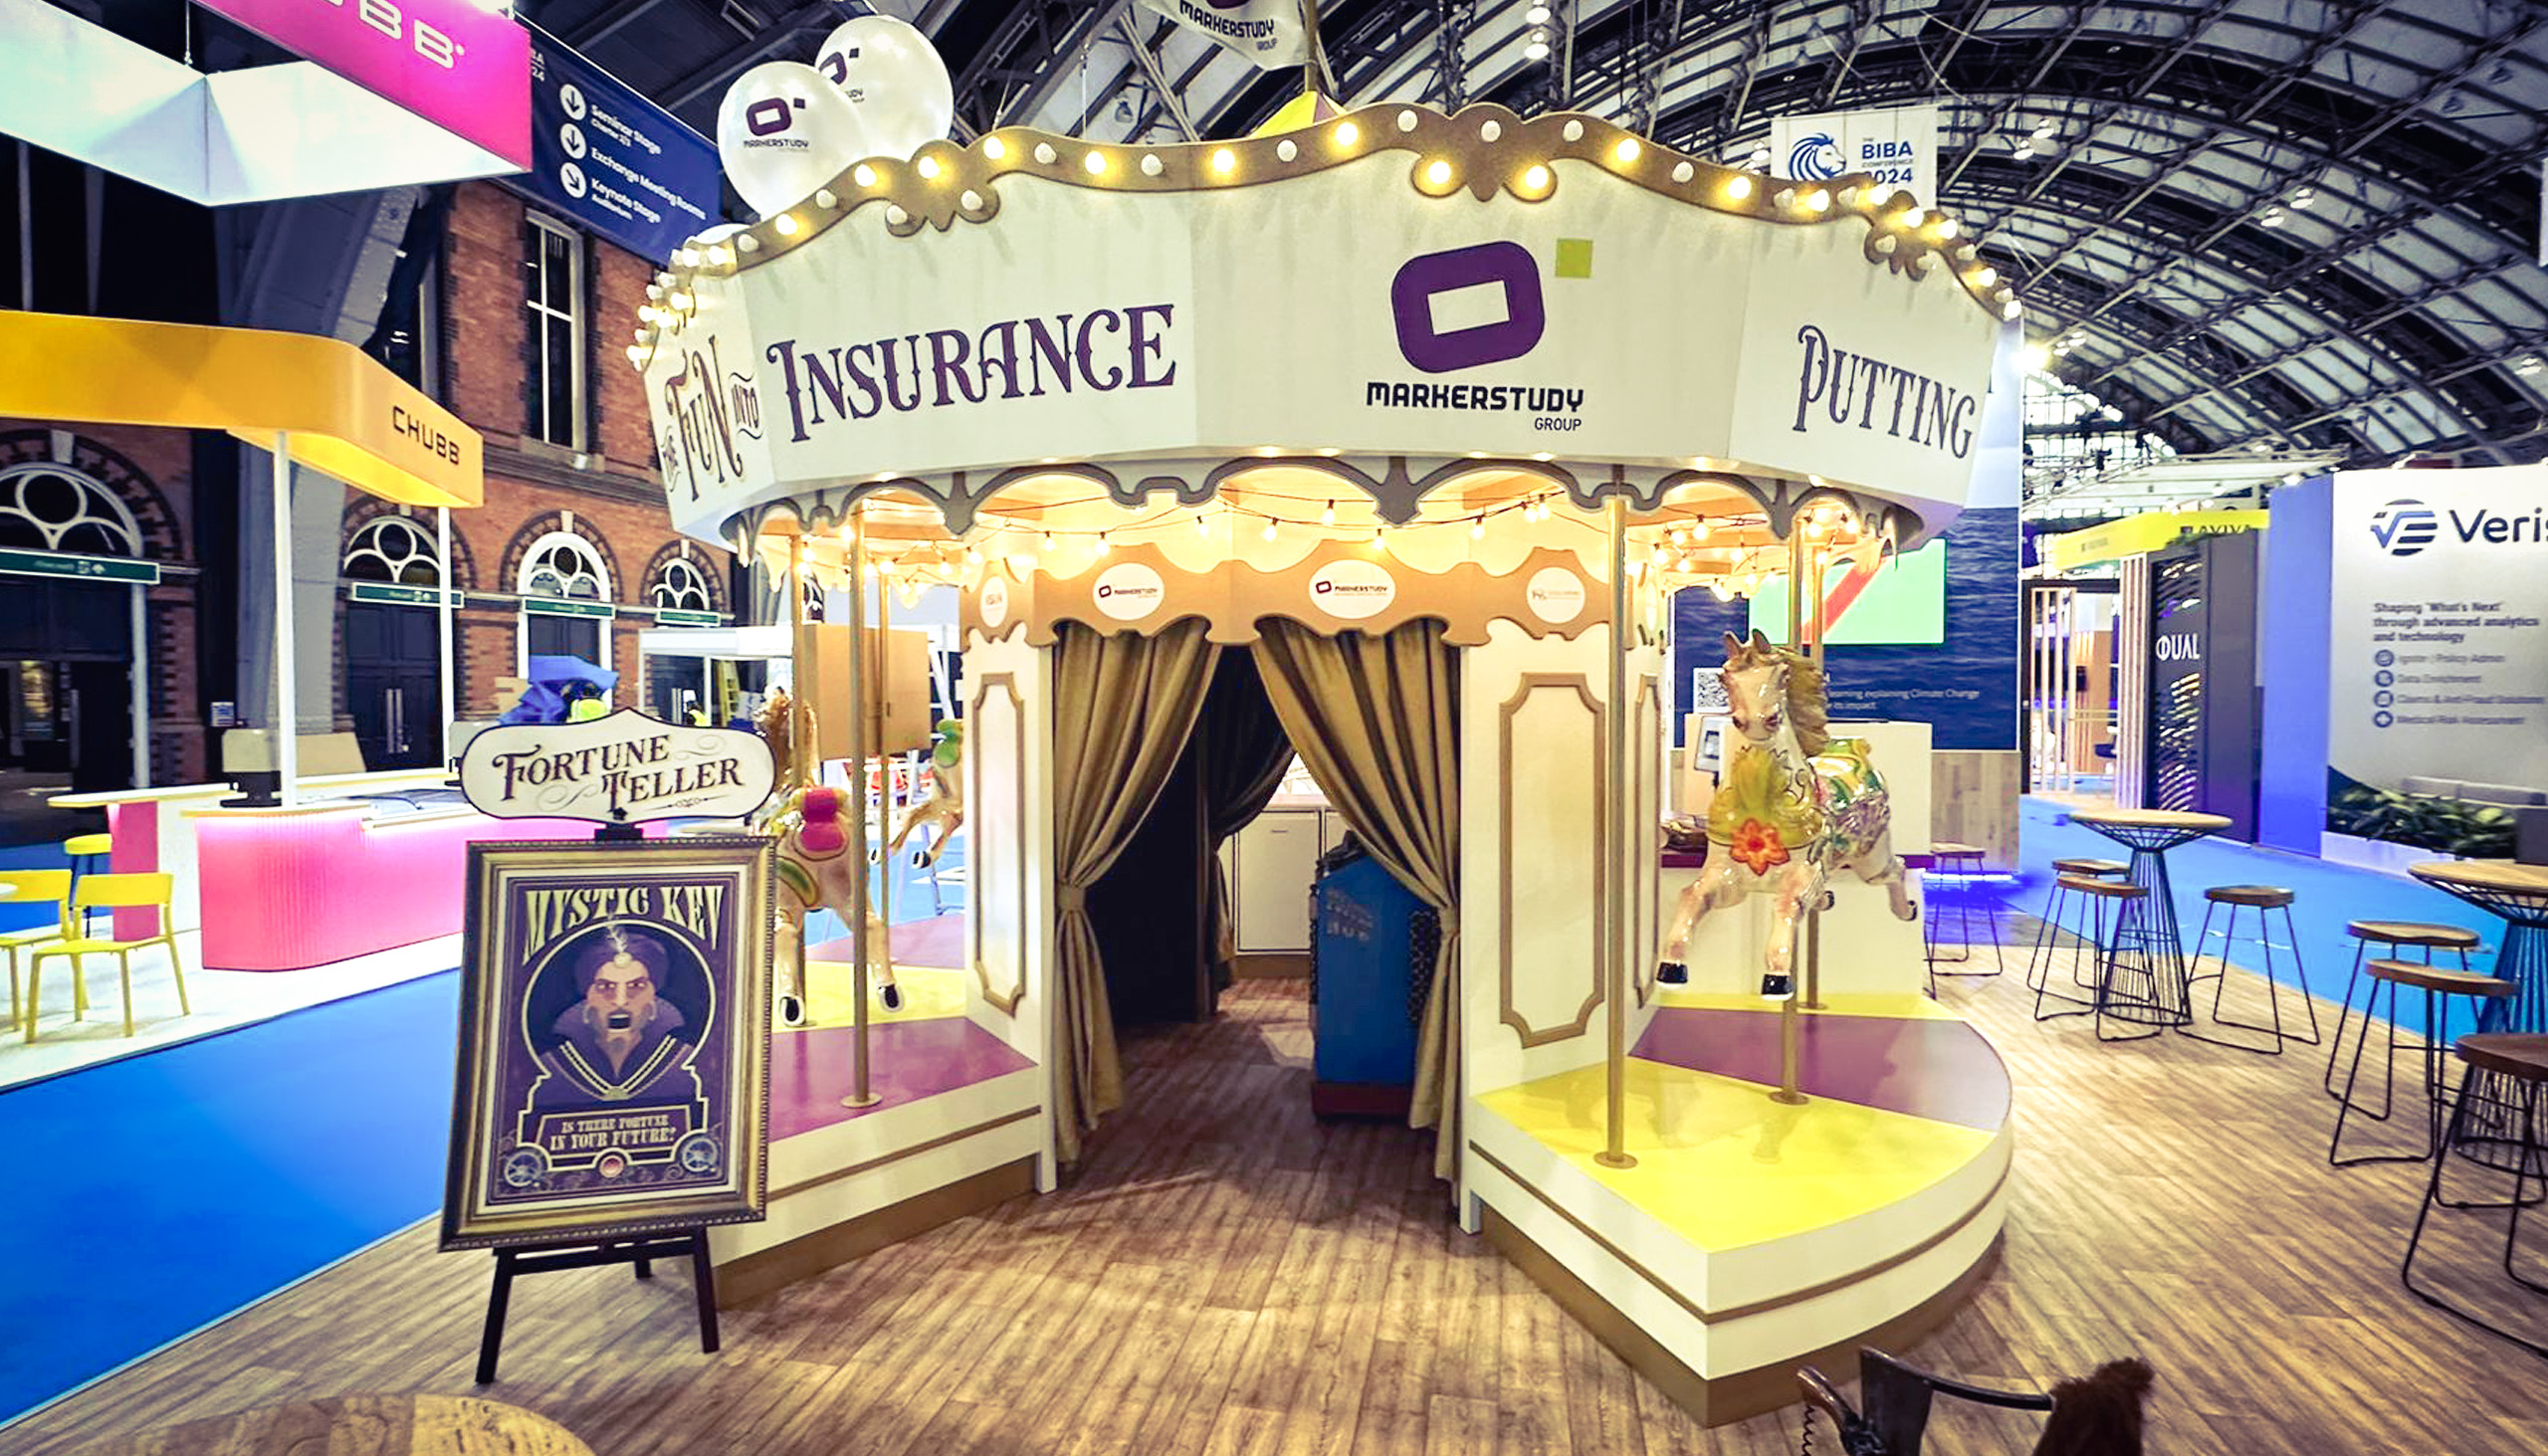 Opus 3 Events Ltd install a Movetech UK turntable to assist in creating Markerstudy Group’s exhibition stand to put ‘The Fun into Insurance’ at The BIBA 2024 Conference